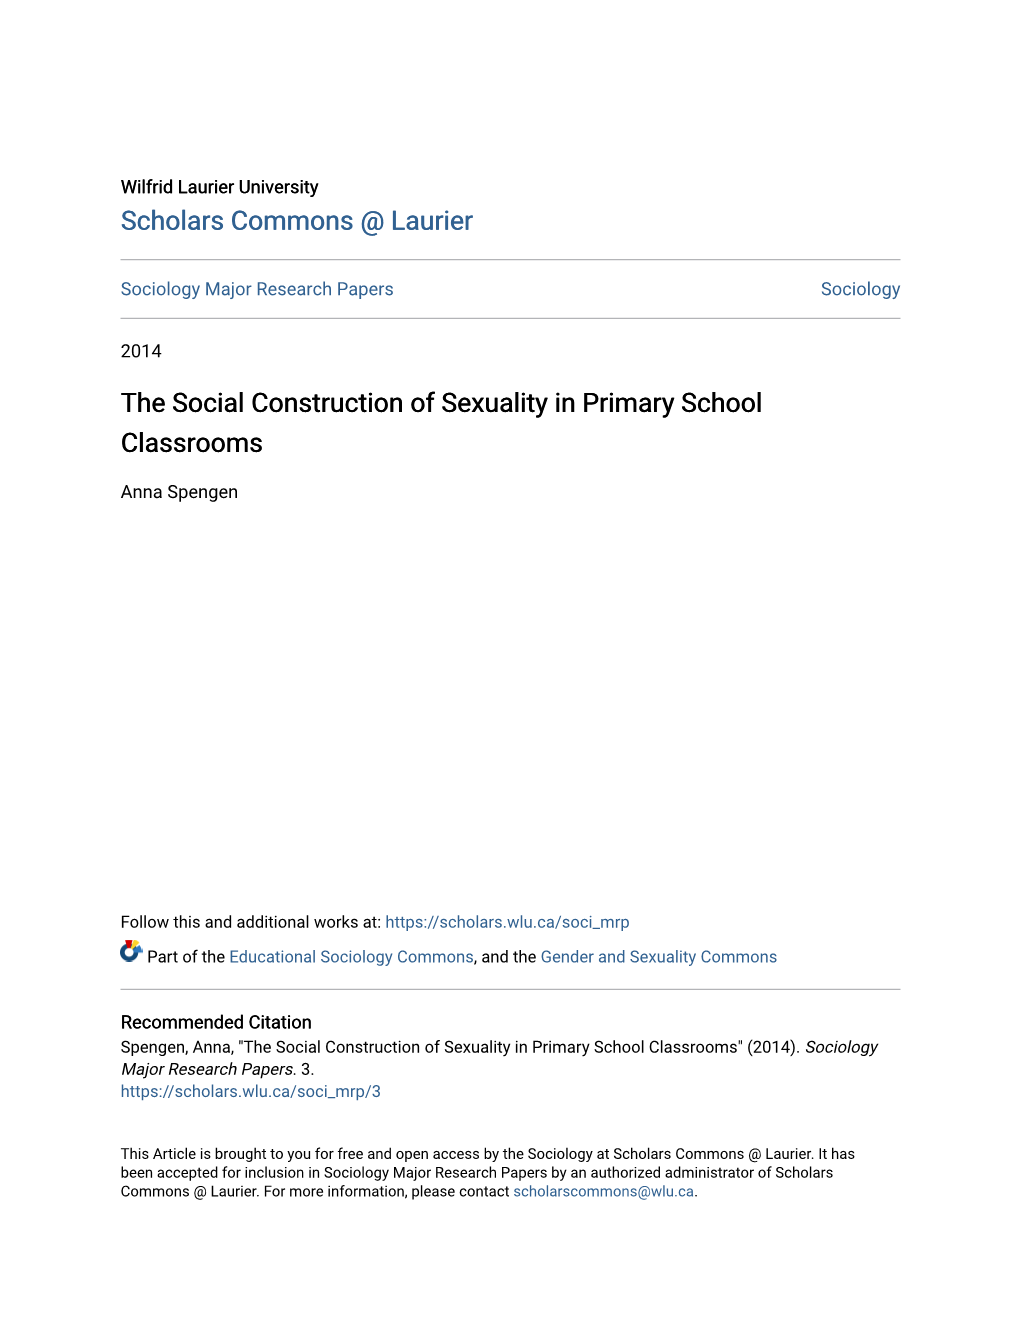 The Social Construction of Sexuality in Primary School Classrooms